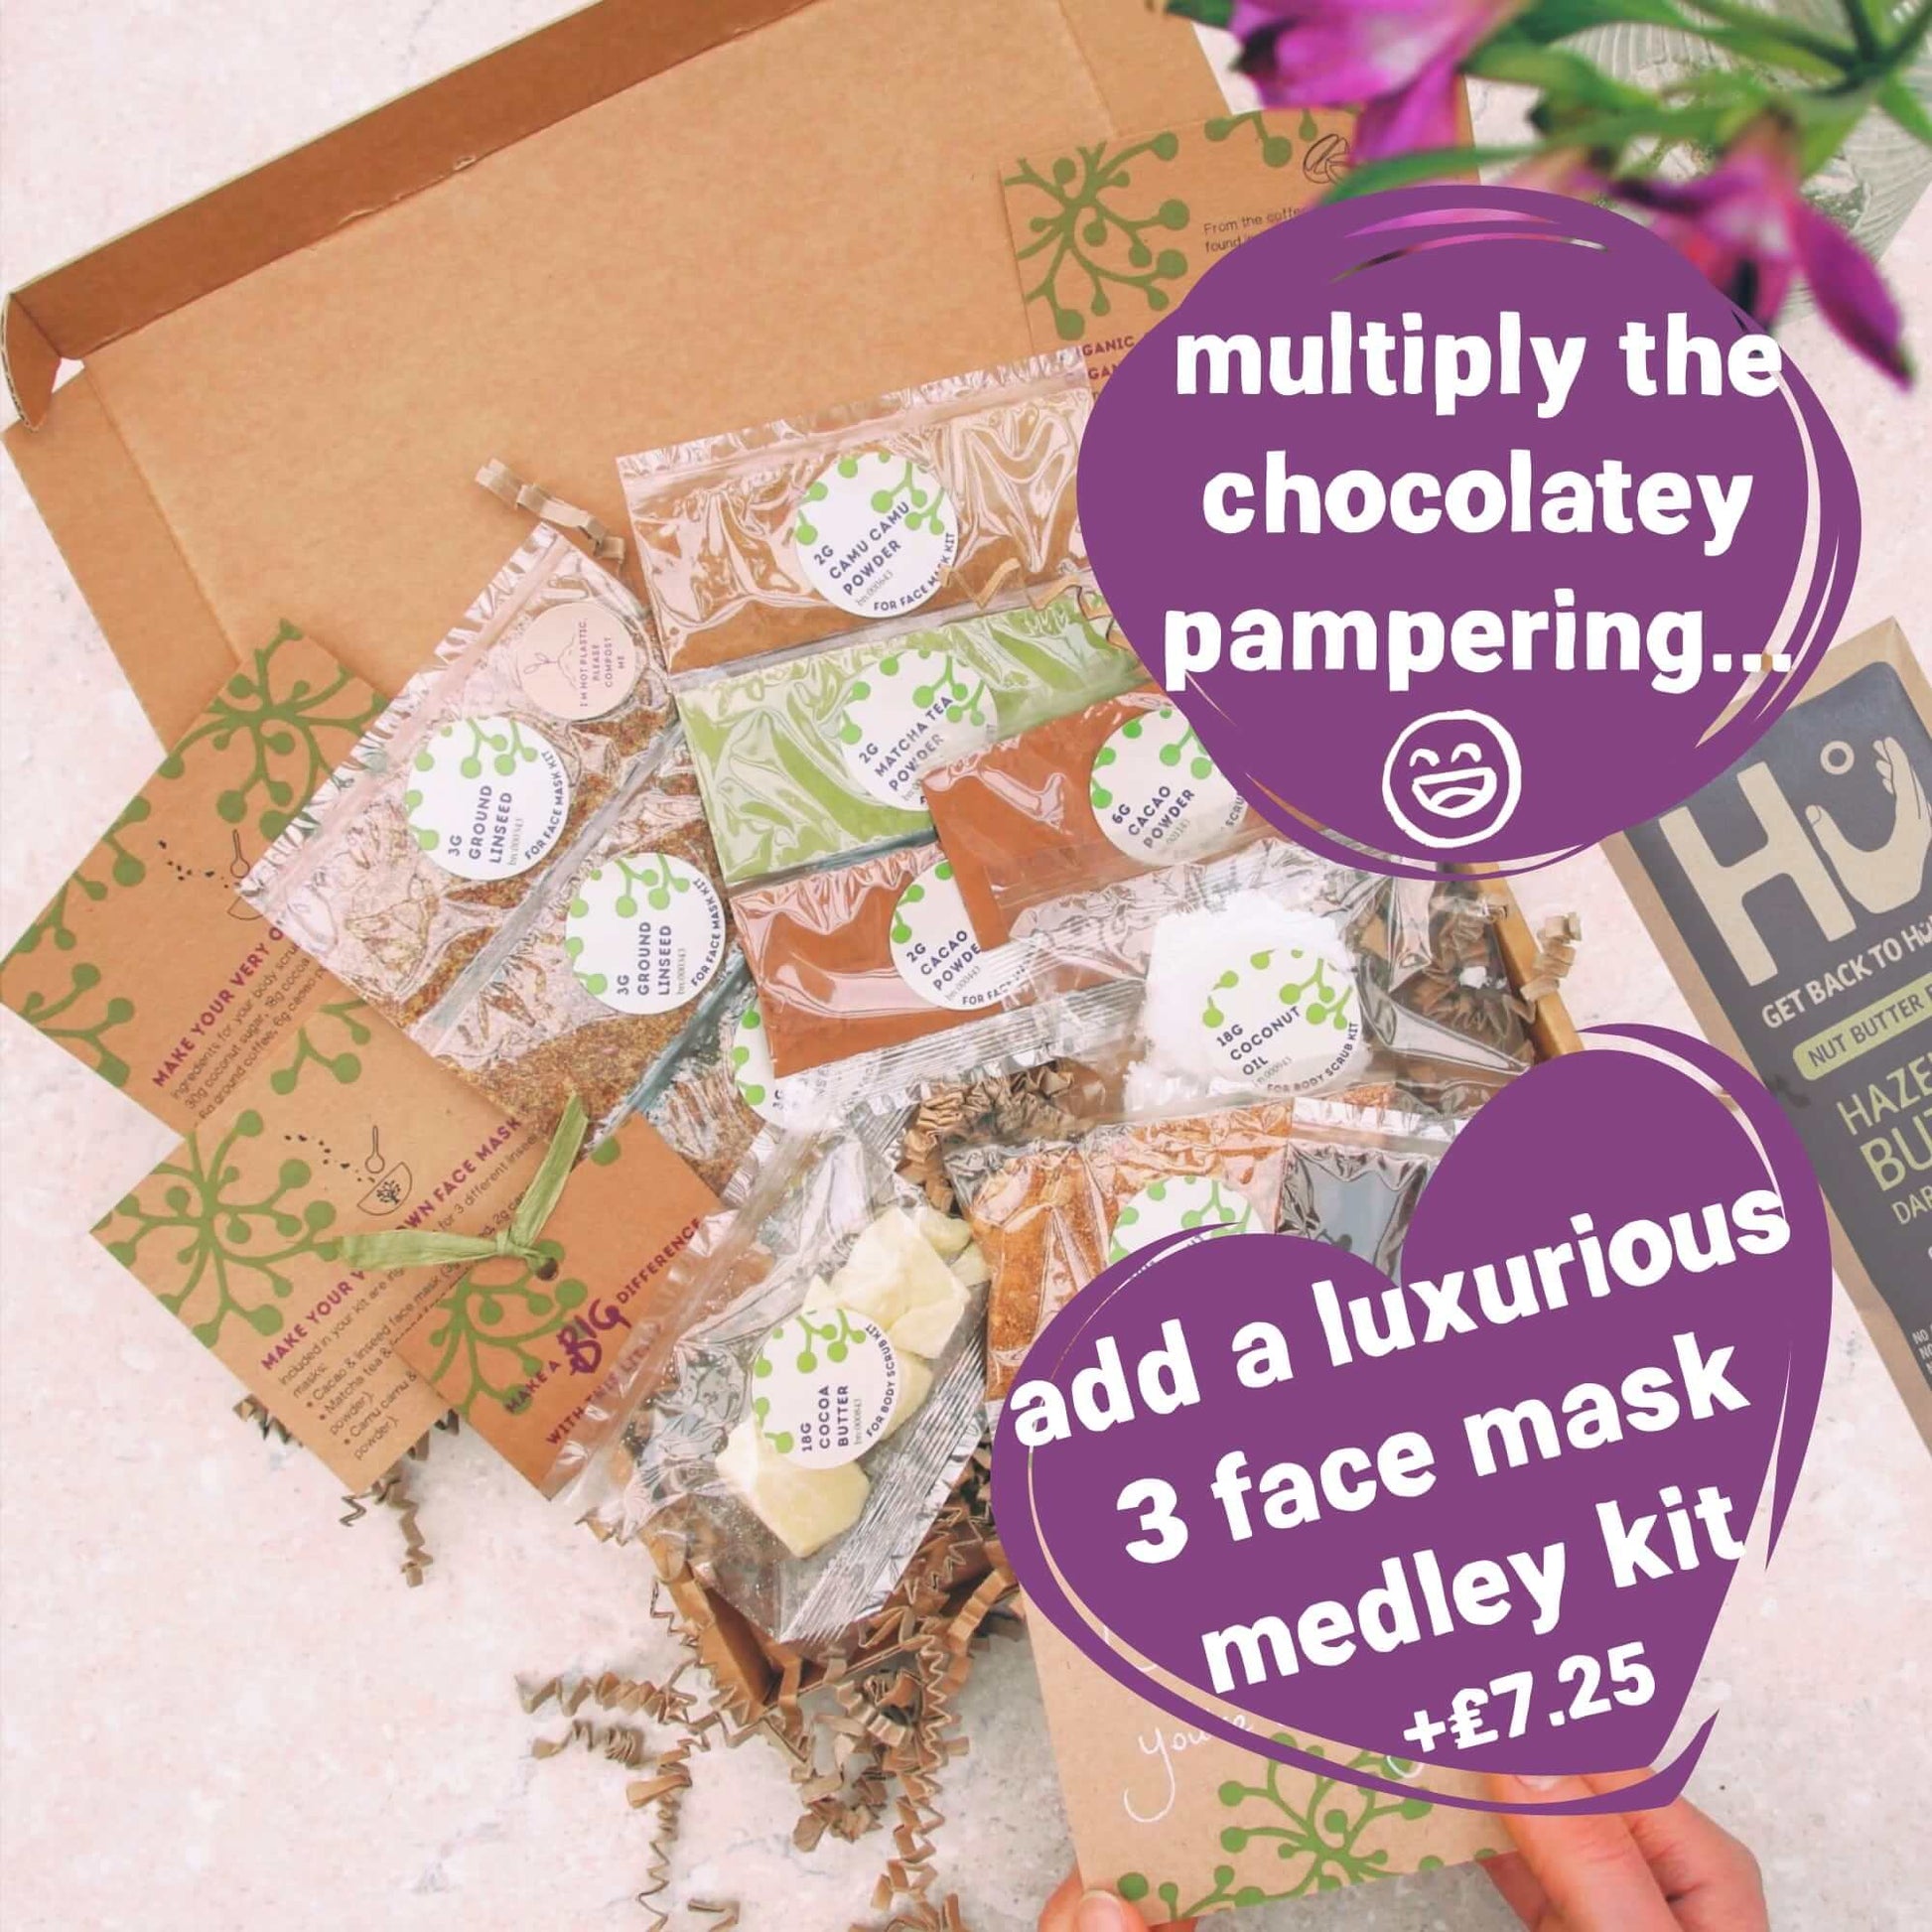 add 3 luxury face mask kits to self care letterbox gift